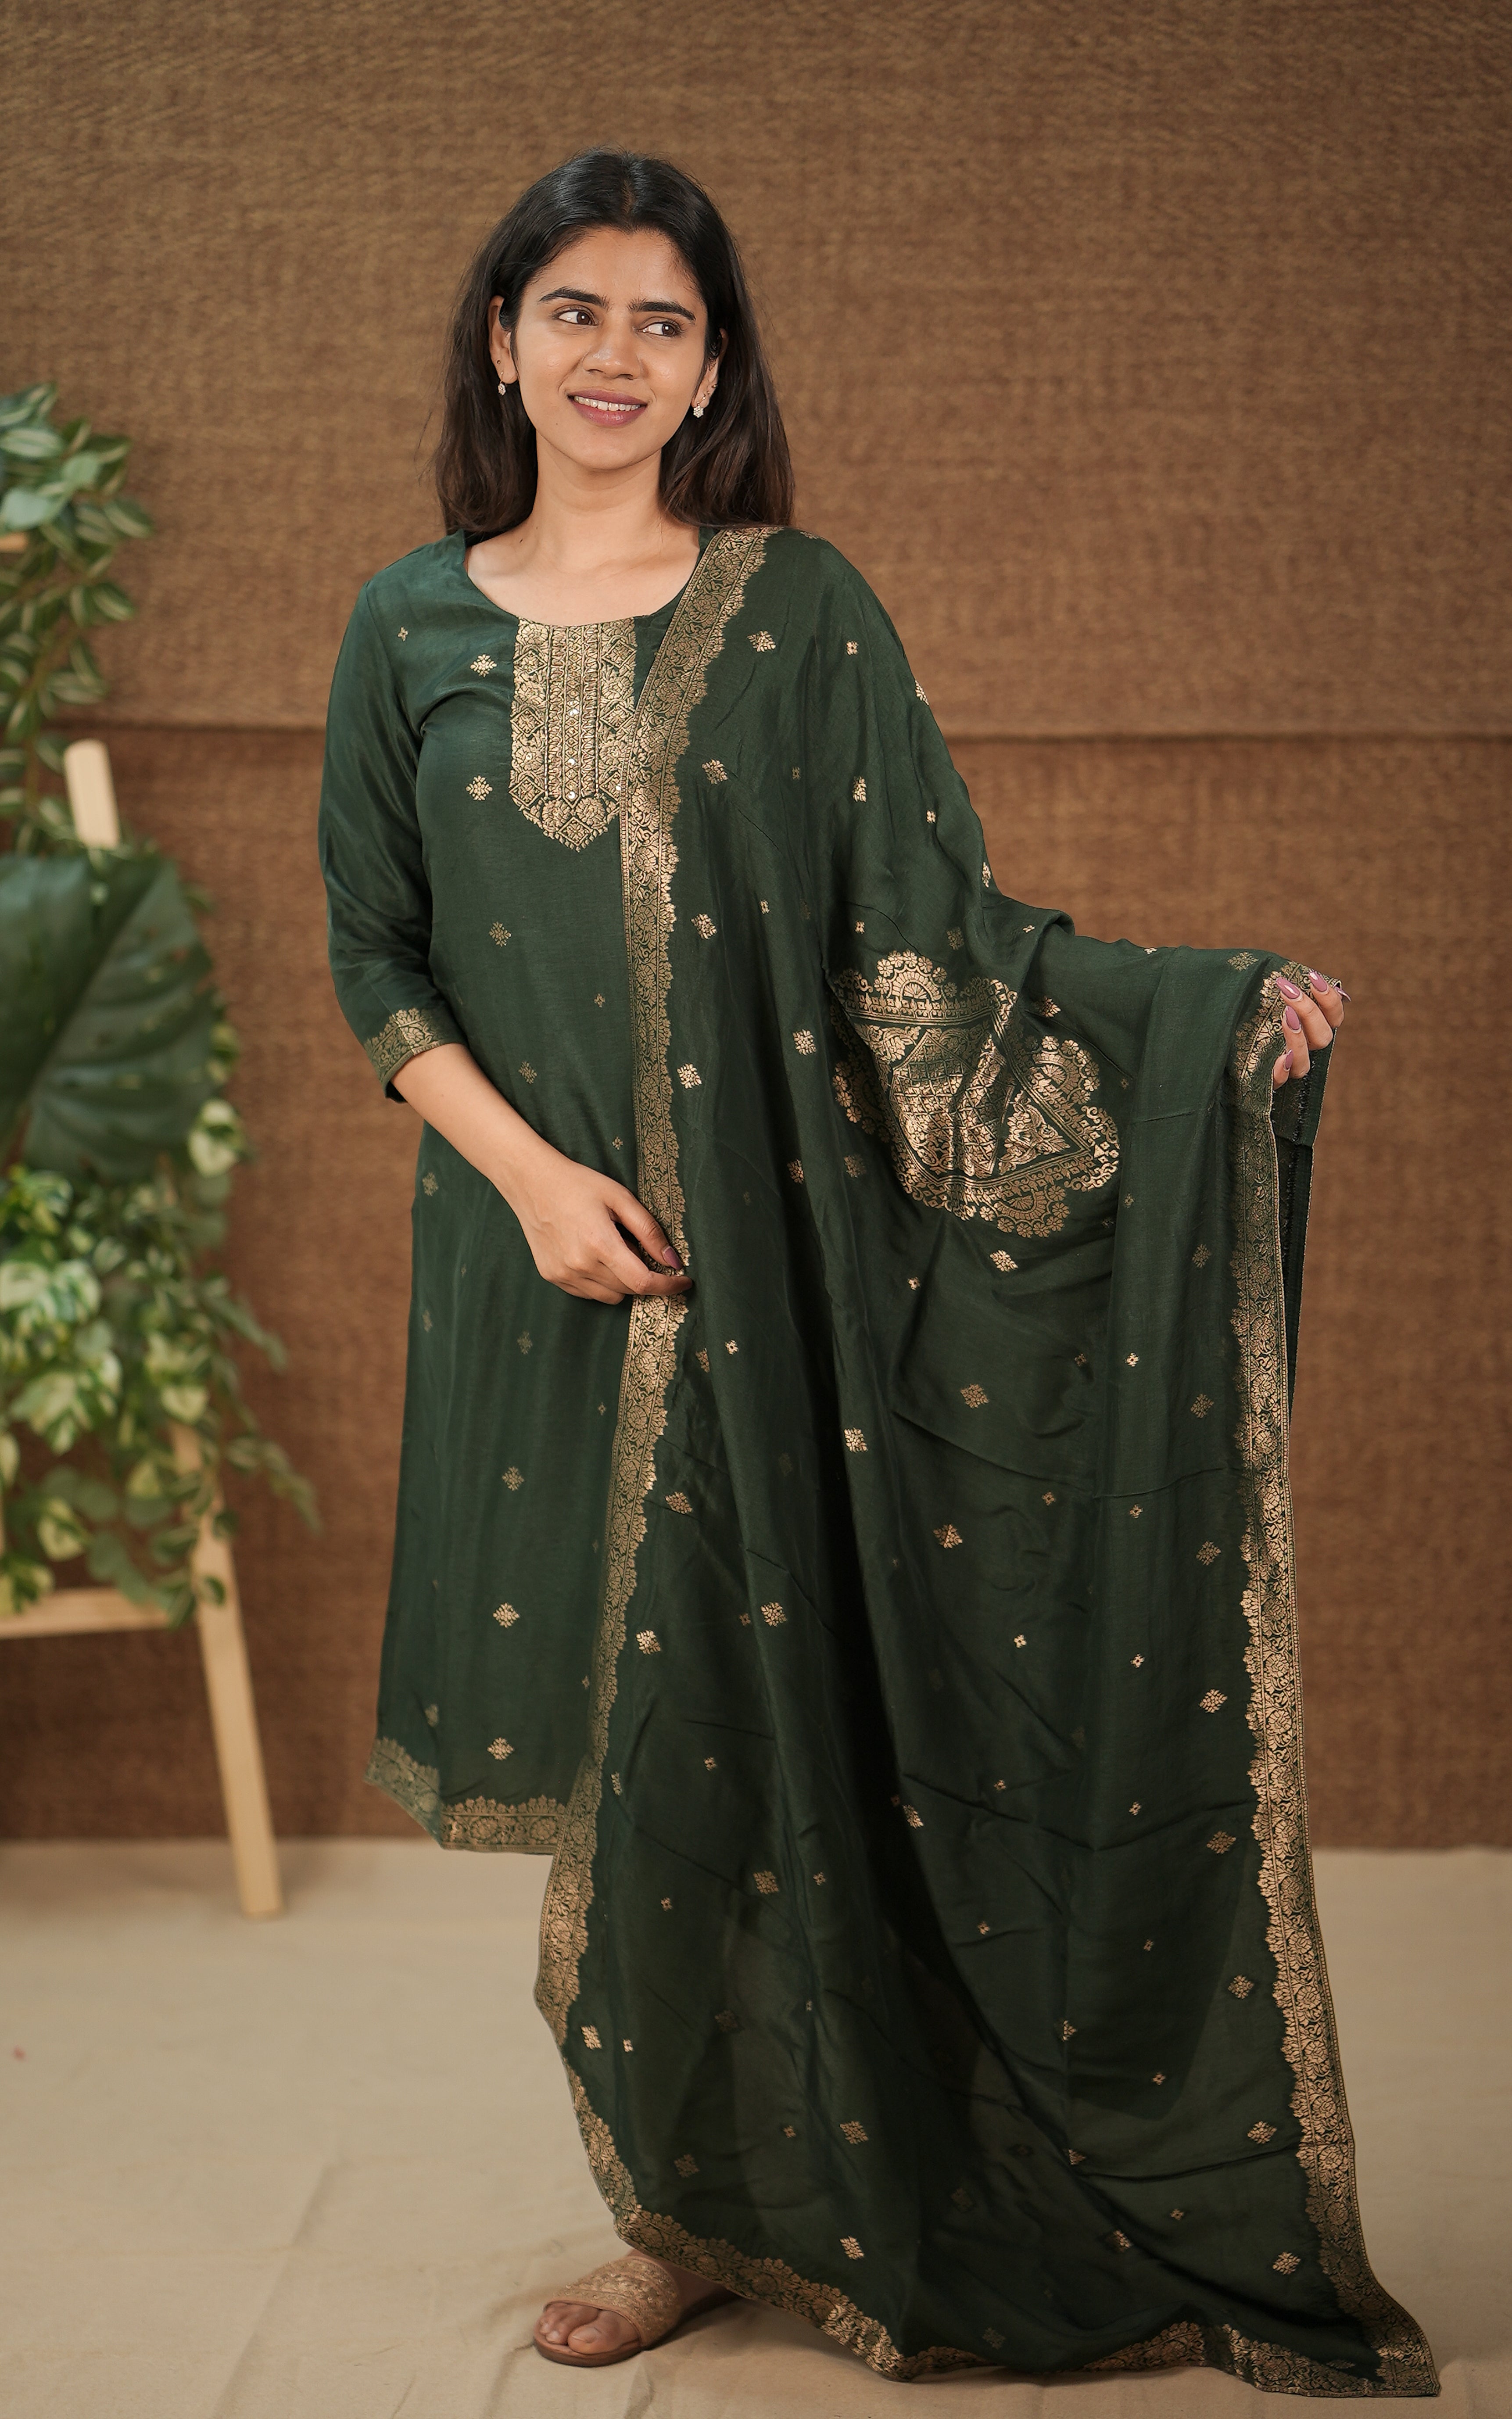 in store bottle green kurti for women with 3/4th sleeve | kurti with art work | chanderi dupatta | royal look kurti for special occasions | 